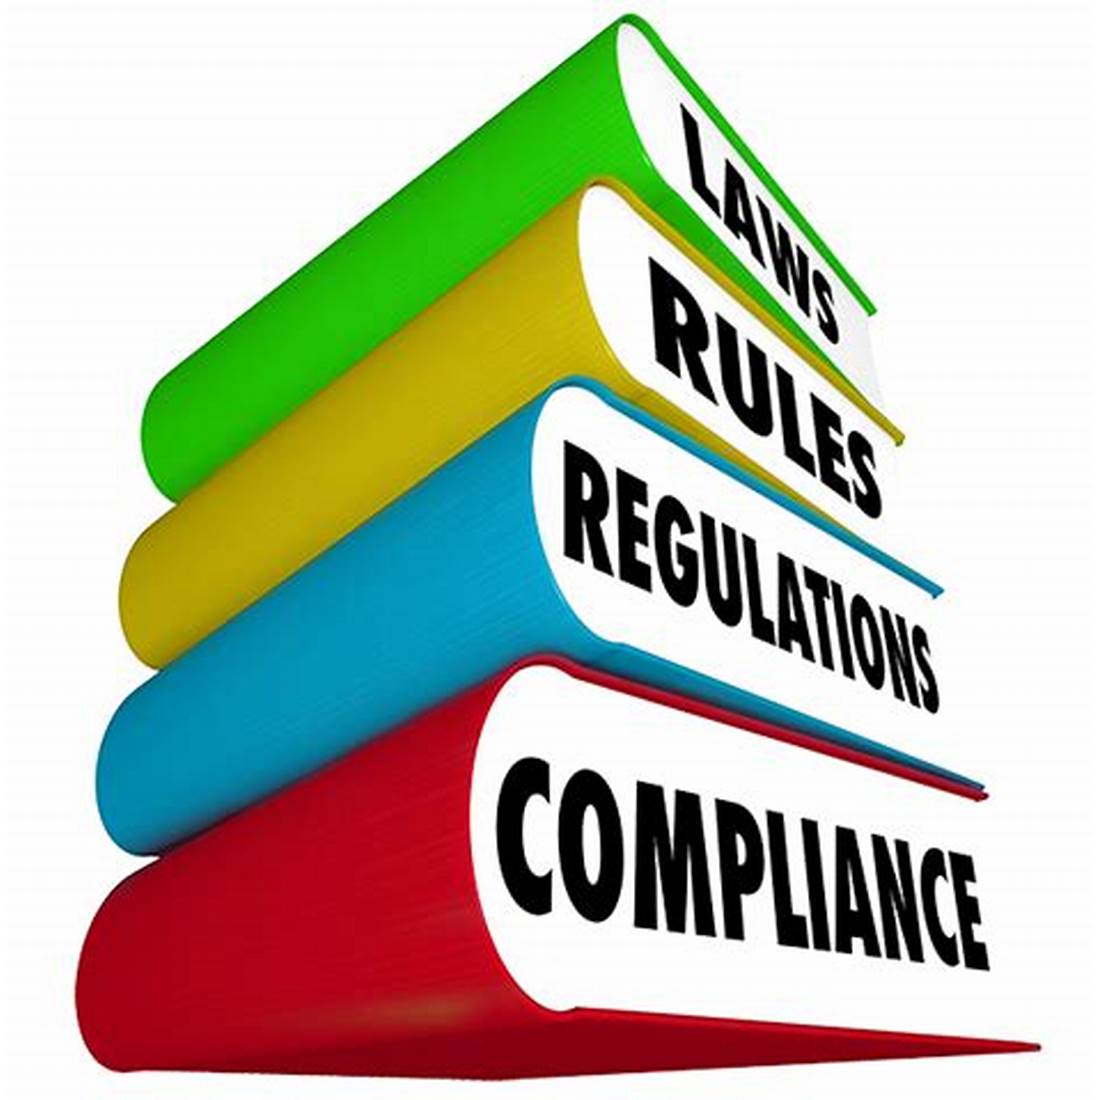 Compliance with Safety Standards and Regulations